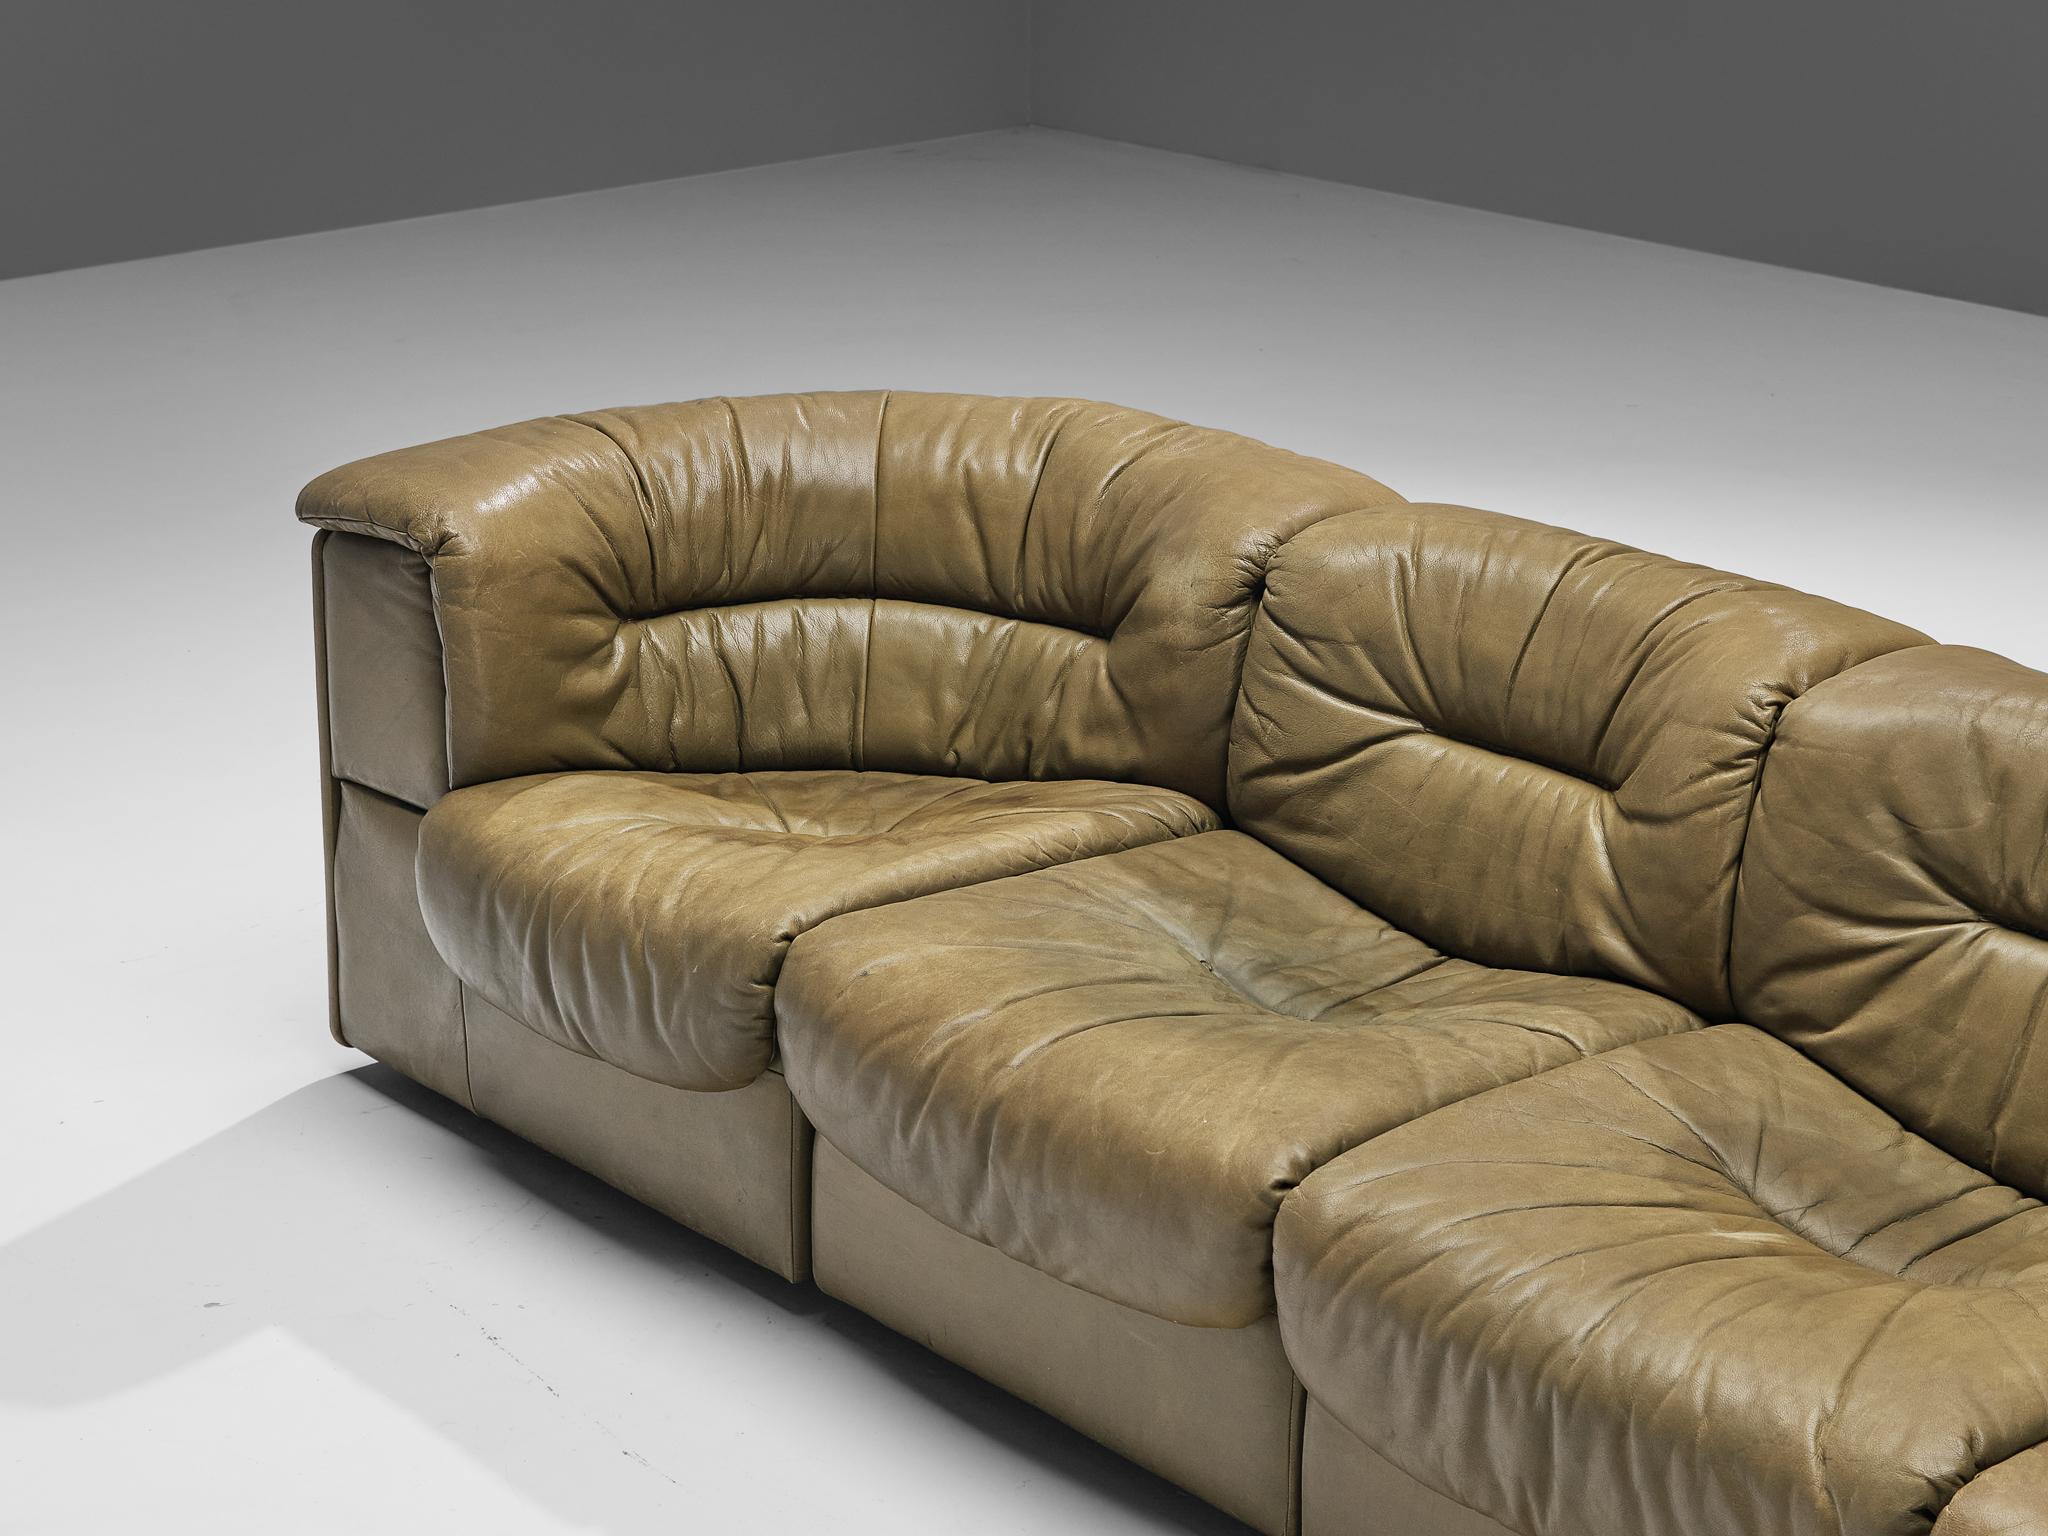 Swiss De Sede 'DS-14' Modular Sofa in Patinated Olive Green Leather